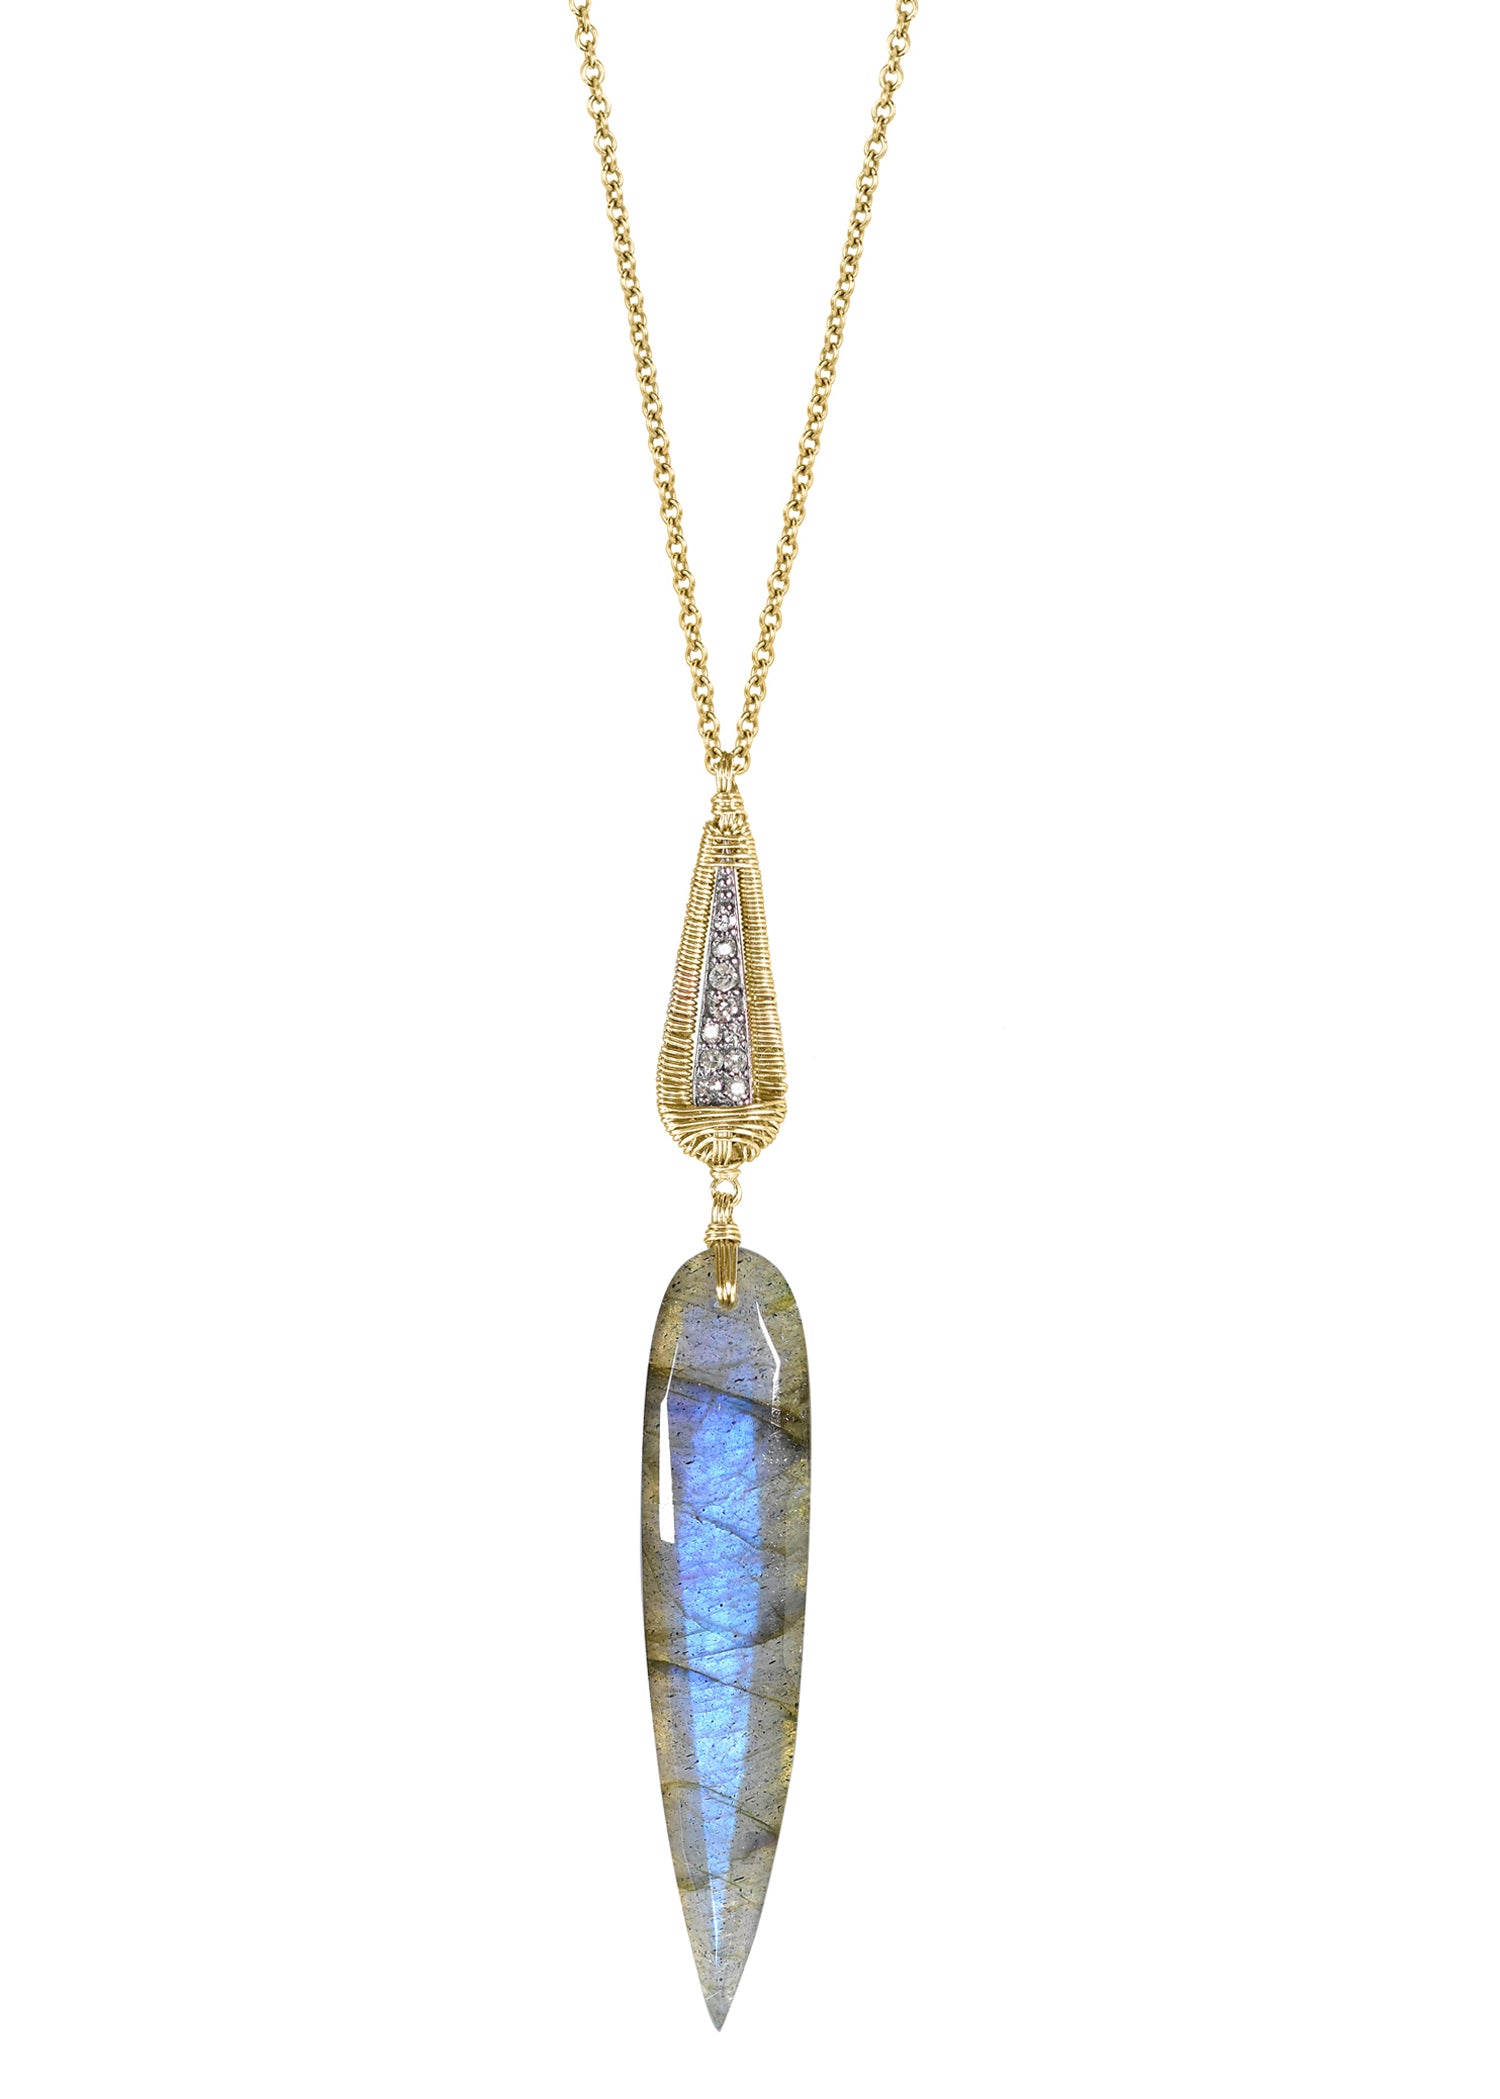 Diamond Labradorite 14k gold Sterling silver Mixed metal Special order only Necklace measures 31" in length Pendant measures 2-1/2" in length and 3/8" in width at the widest point Handmade in our Los Angeles studio